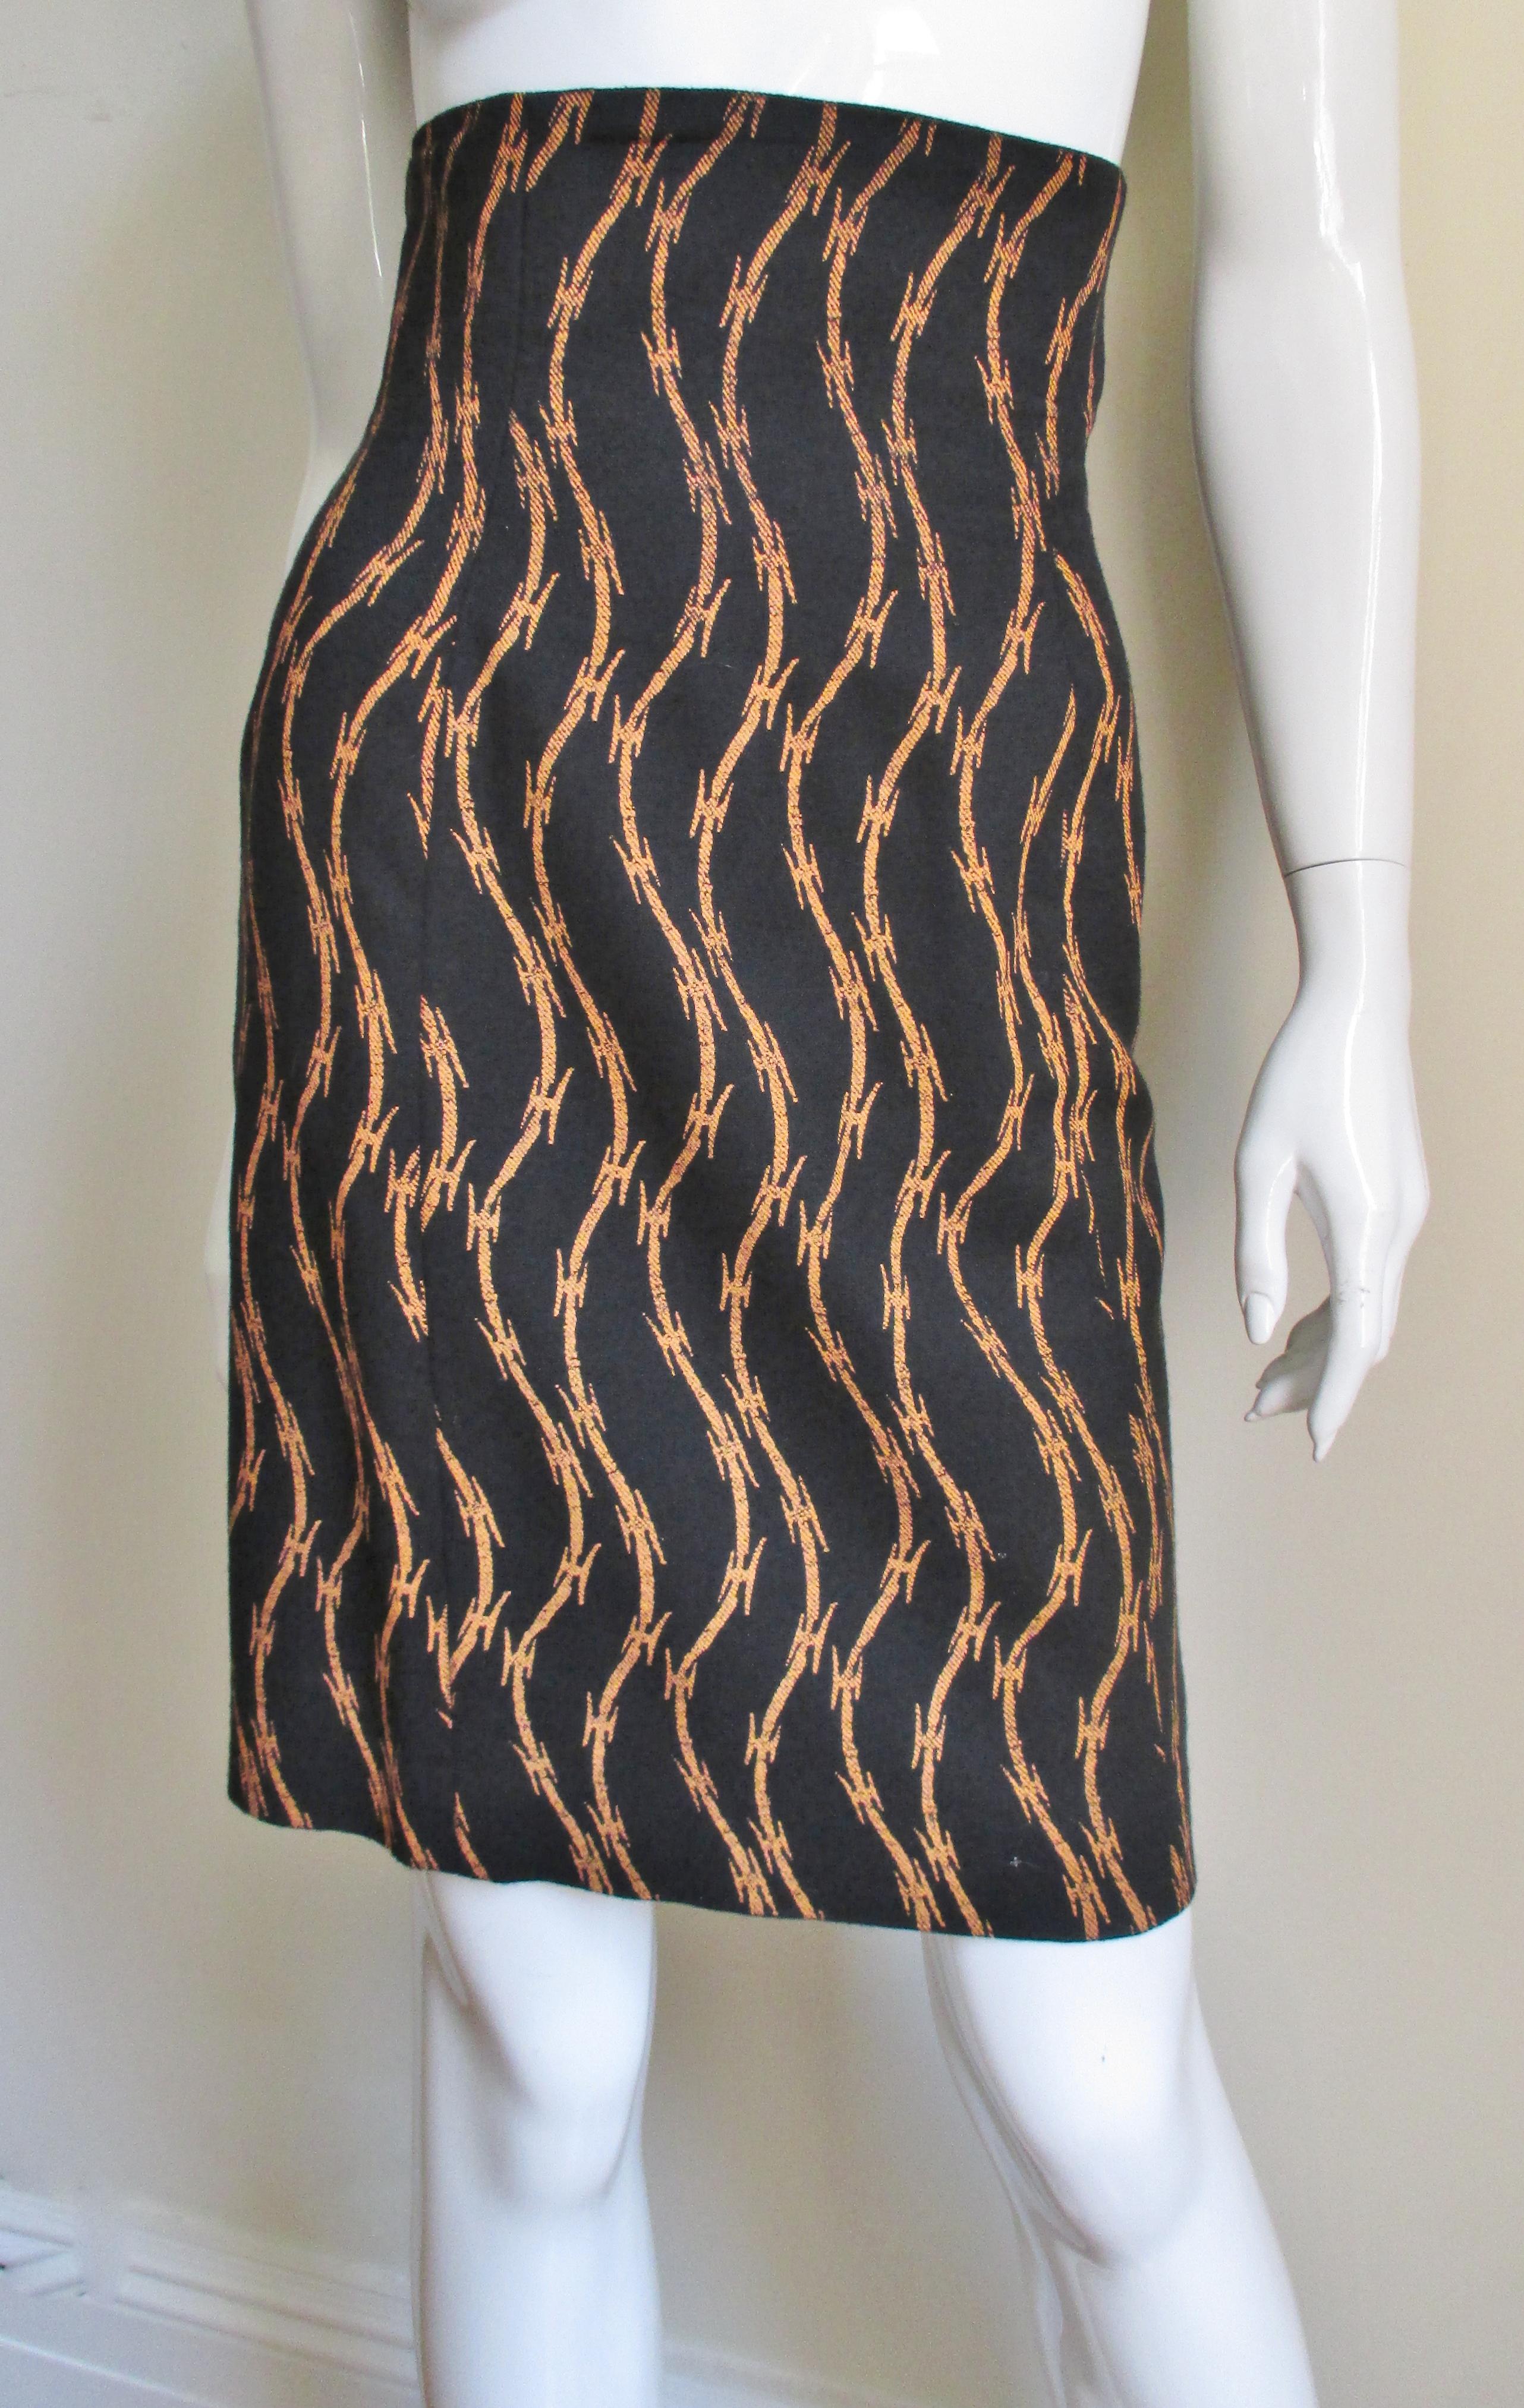 Black Stephen Sprouse Iconic Barb Wire Print Skirt 1980s For Sale